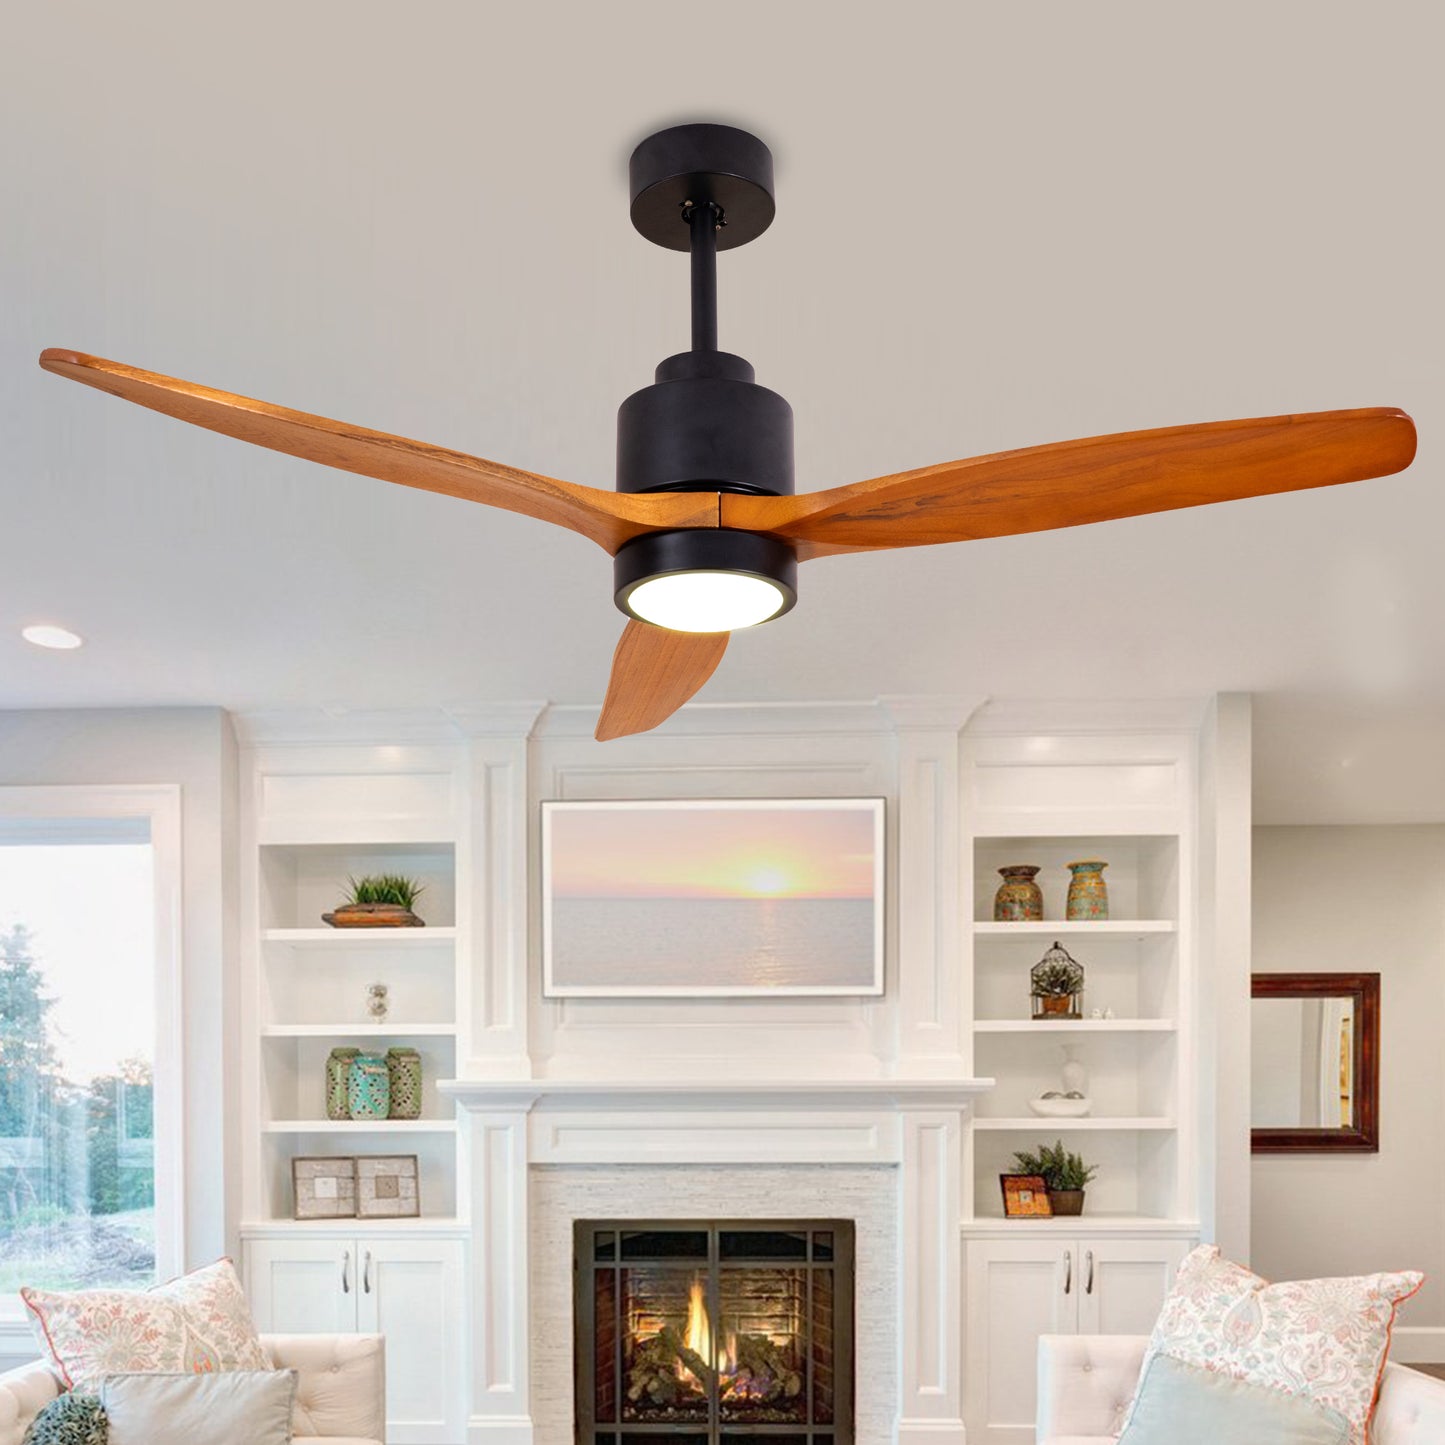 52 Wood Ceiling Fan with Remote Control and 3 Light Color Options